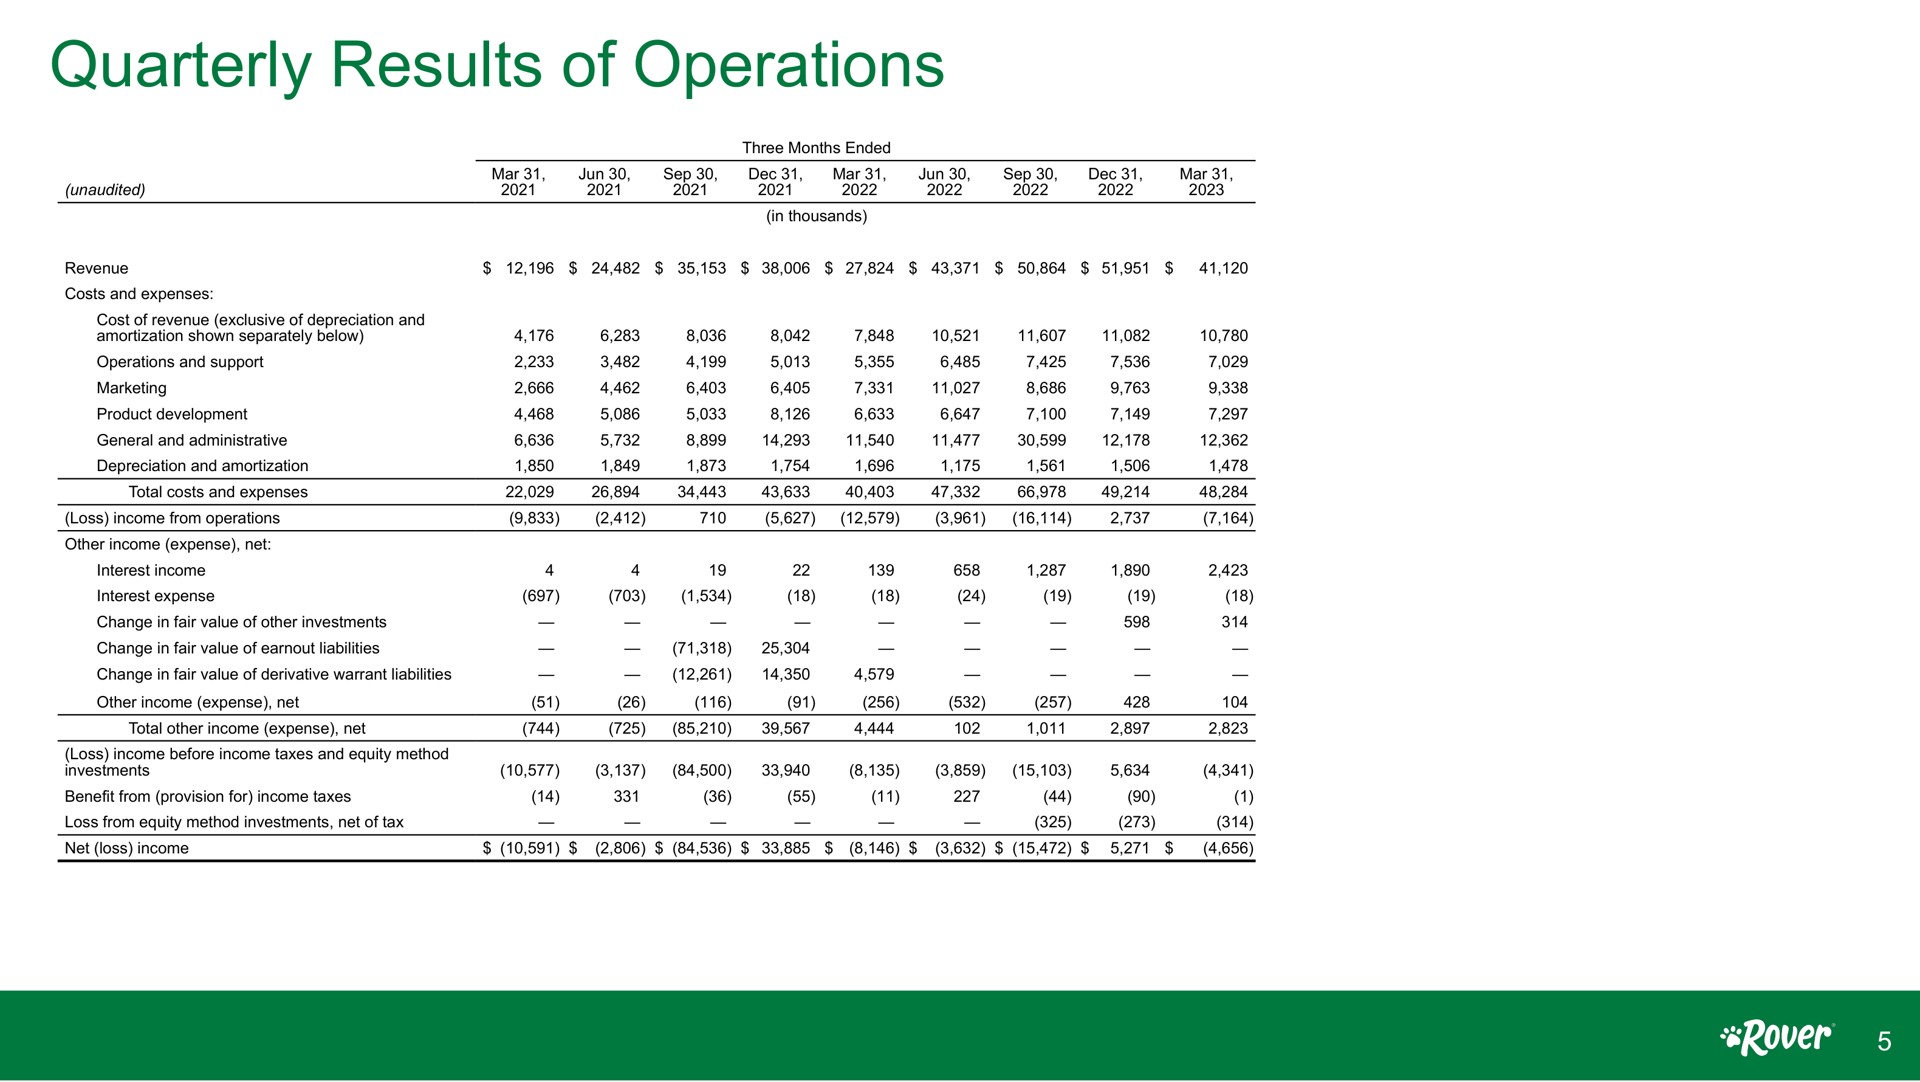 quarterly results of operations | Rover